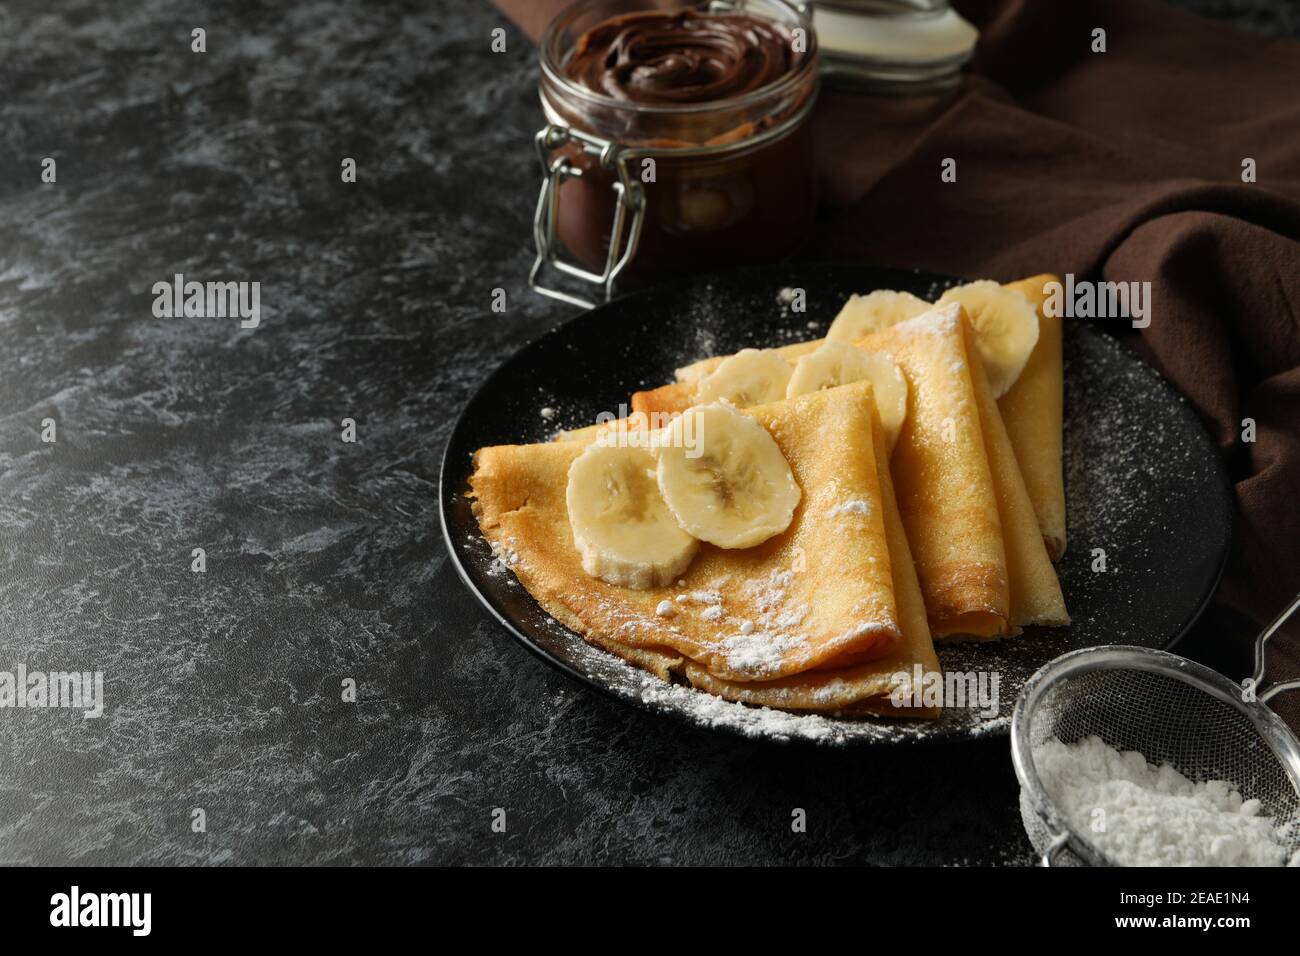 Concept of delicious breakfast with crepes with sugar powder and banana on black smokey background Stock Photo